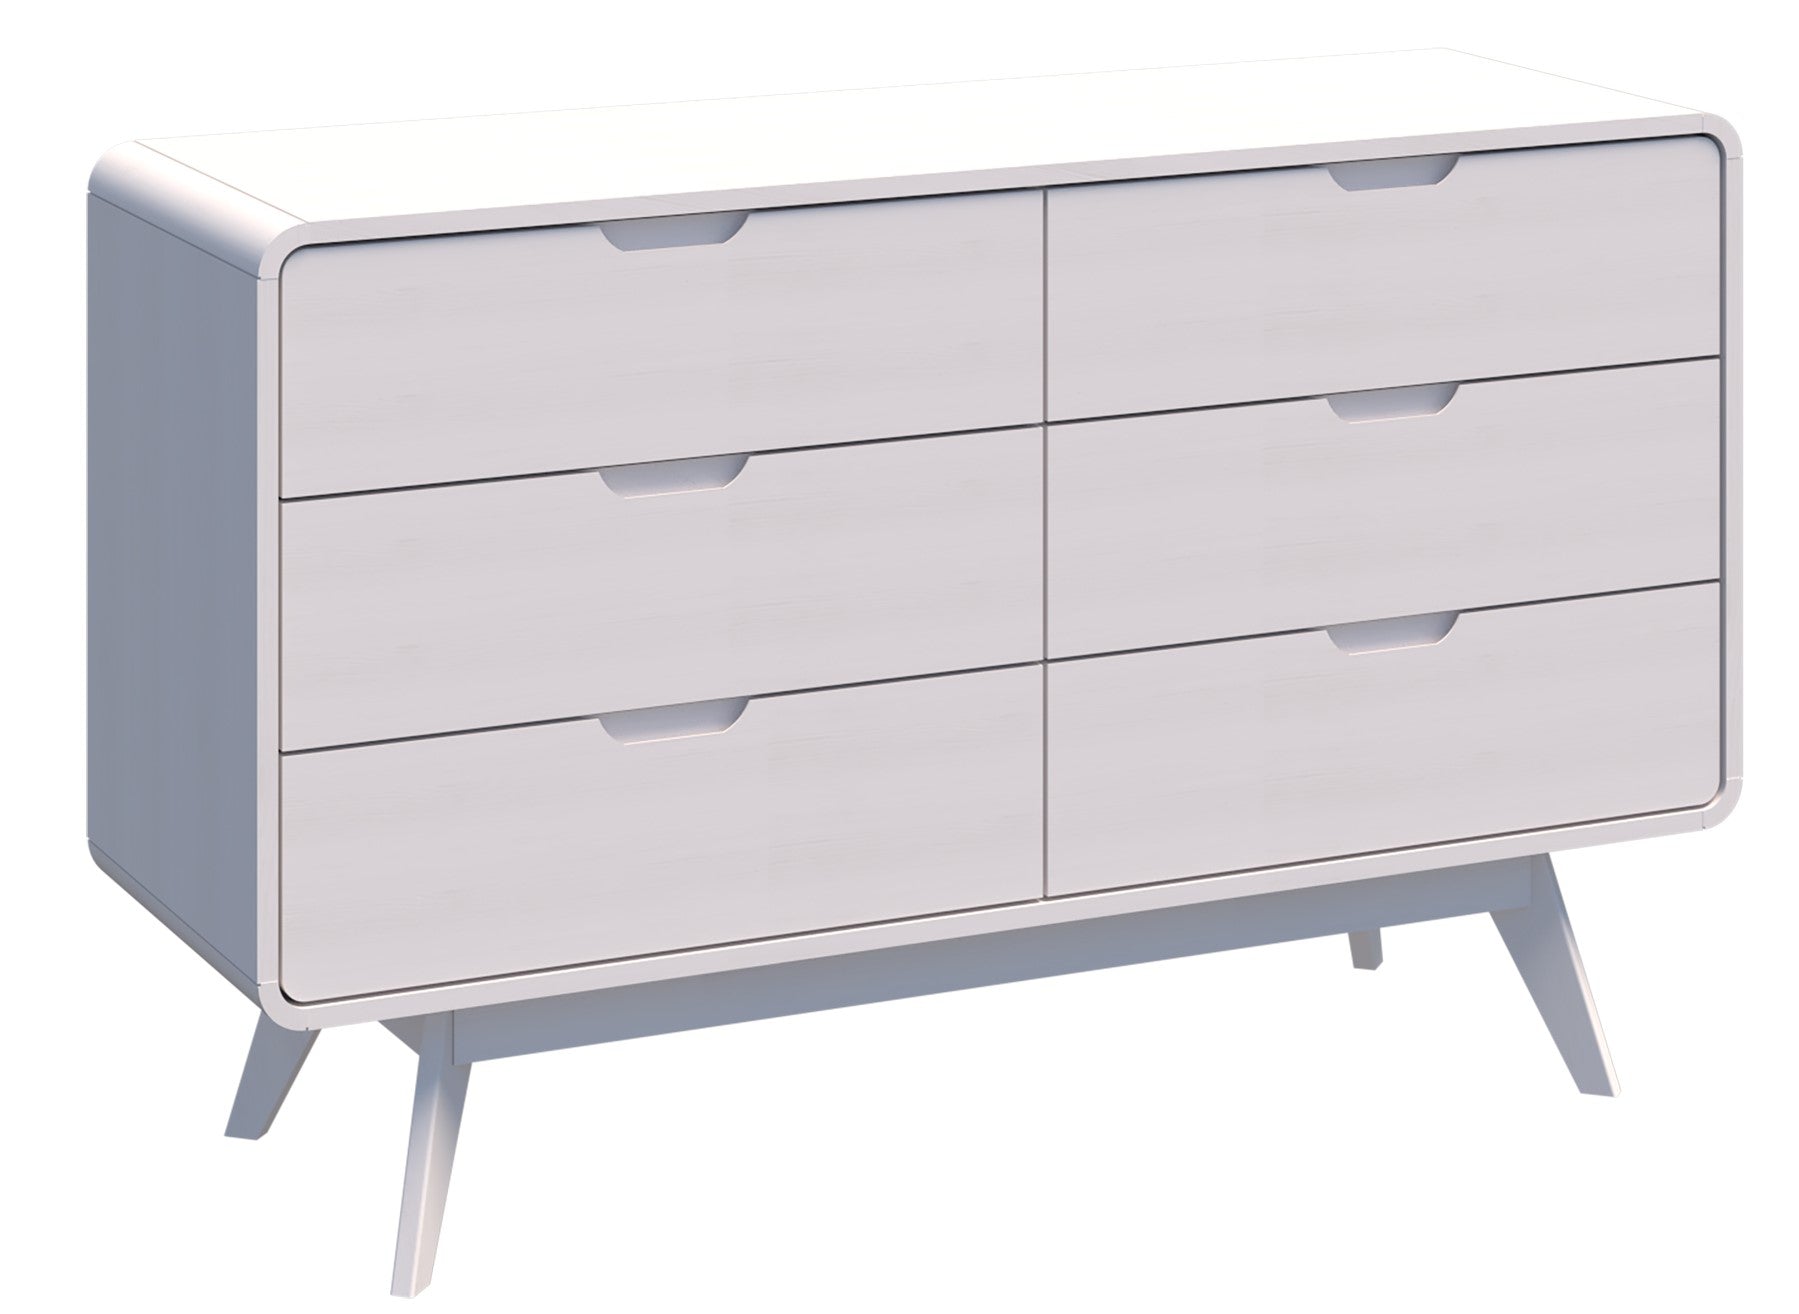 Lowboy - 6 Drawer - ON SALE - 28% OFF - Now $199